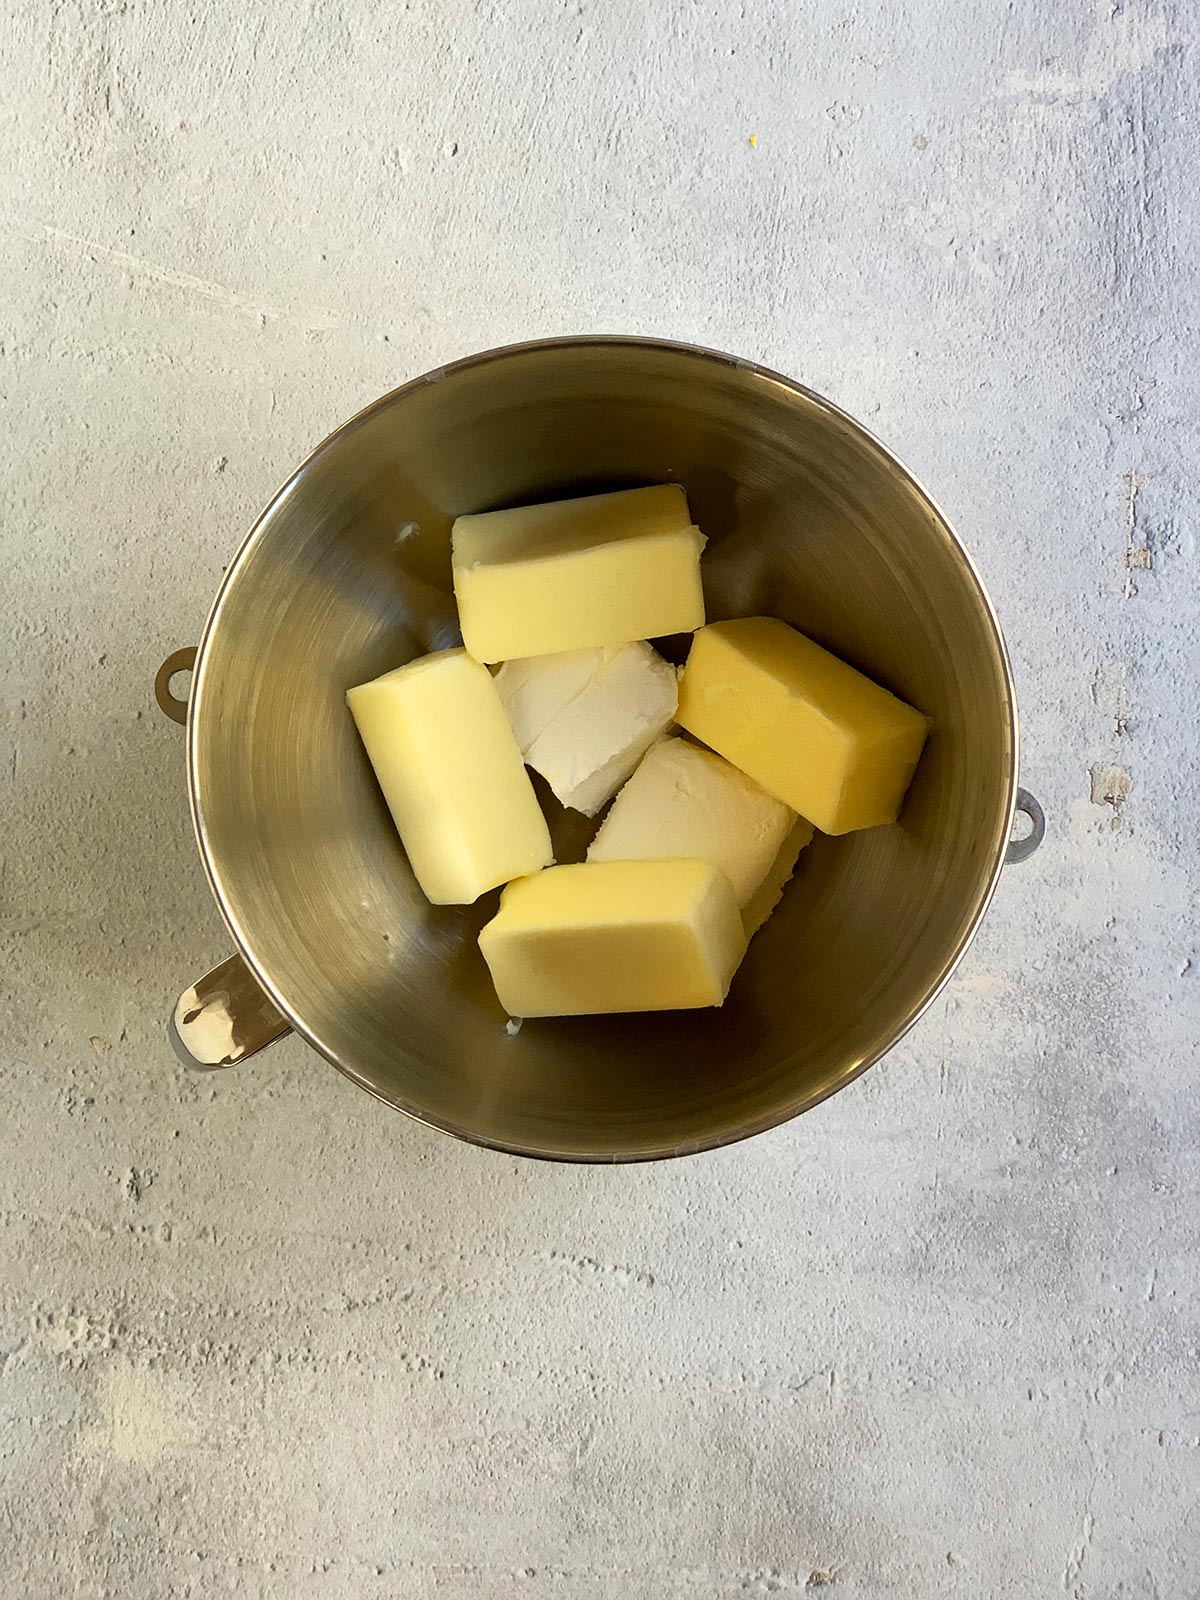 A metal mixing bowl of butter and cream cheese ready for mixing.